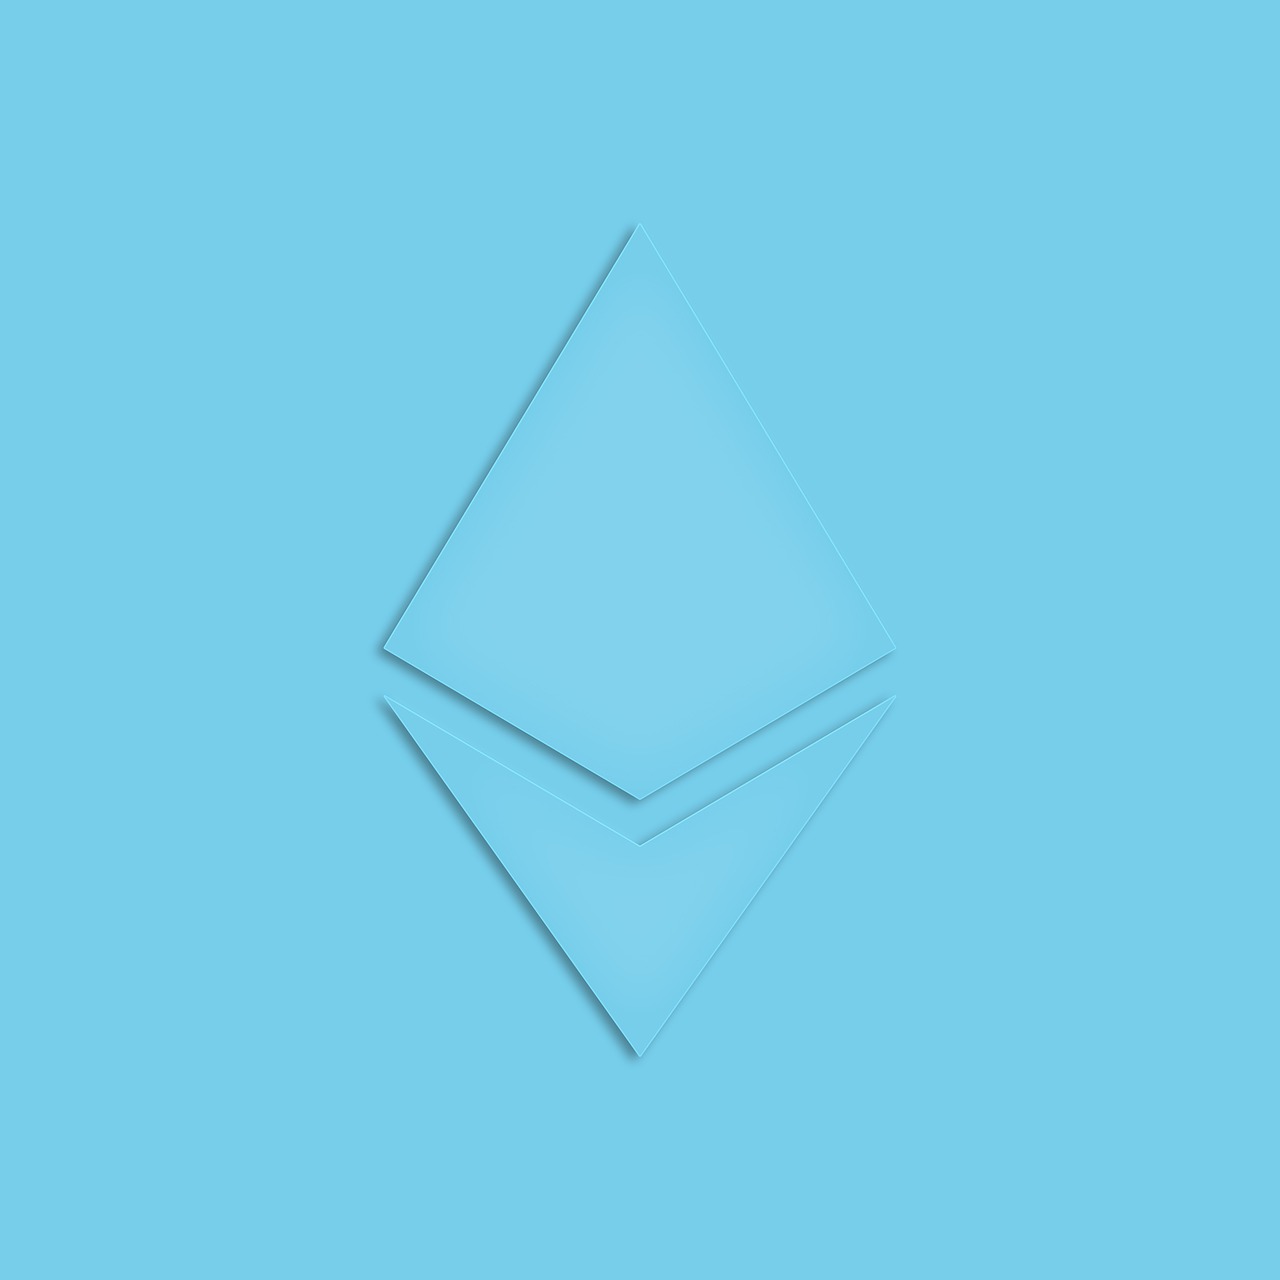 the ether logo on a blue background, a low poly render, postminimalism, folded, stingray, email, simple and clean illustration